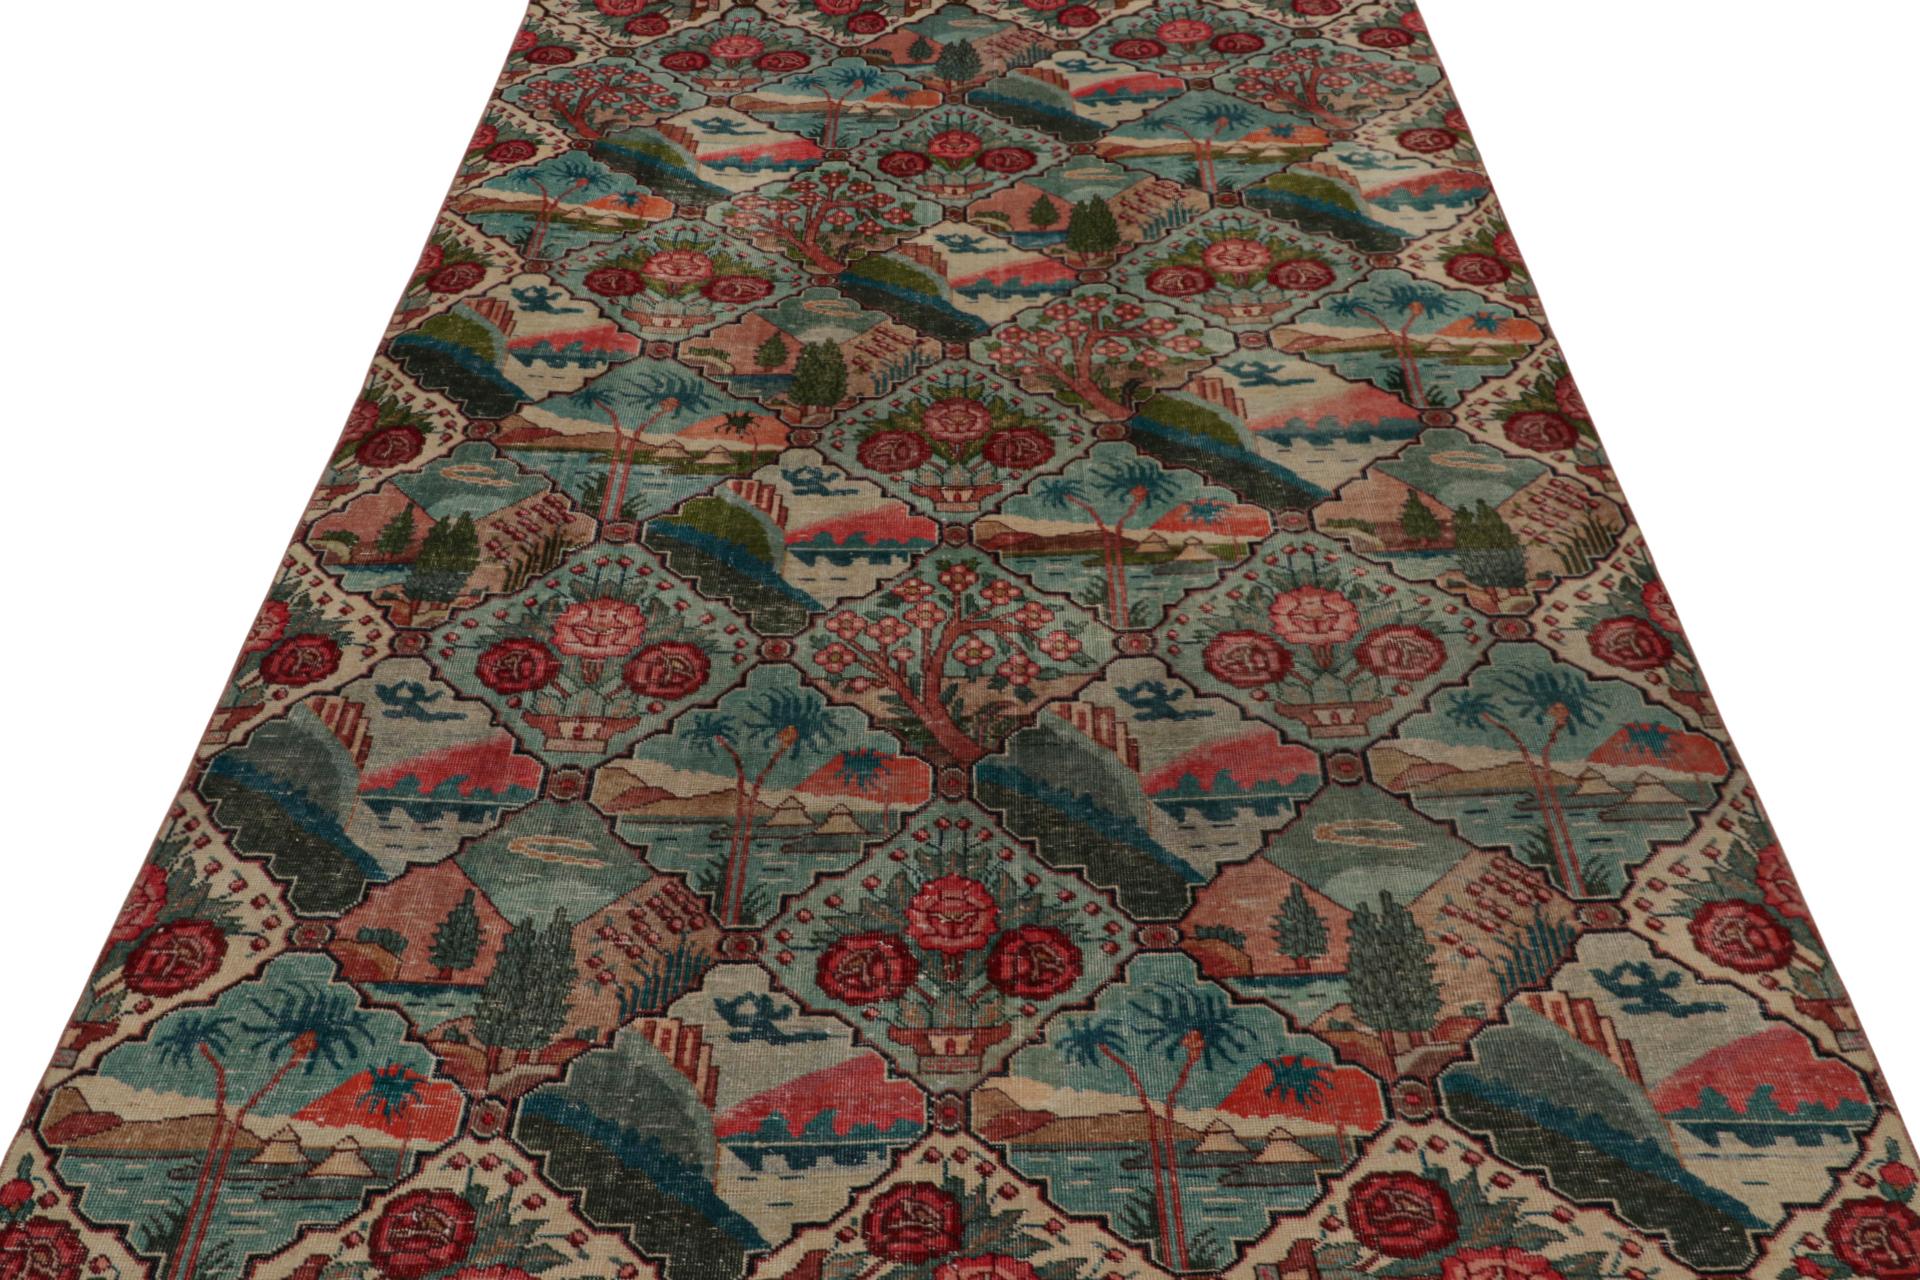 Turkish Vintage Tabriz Style Rug with Geometric Patterns and Pictorials from Rug & Kilim